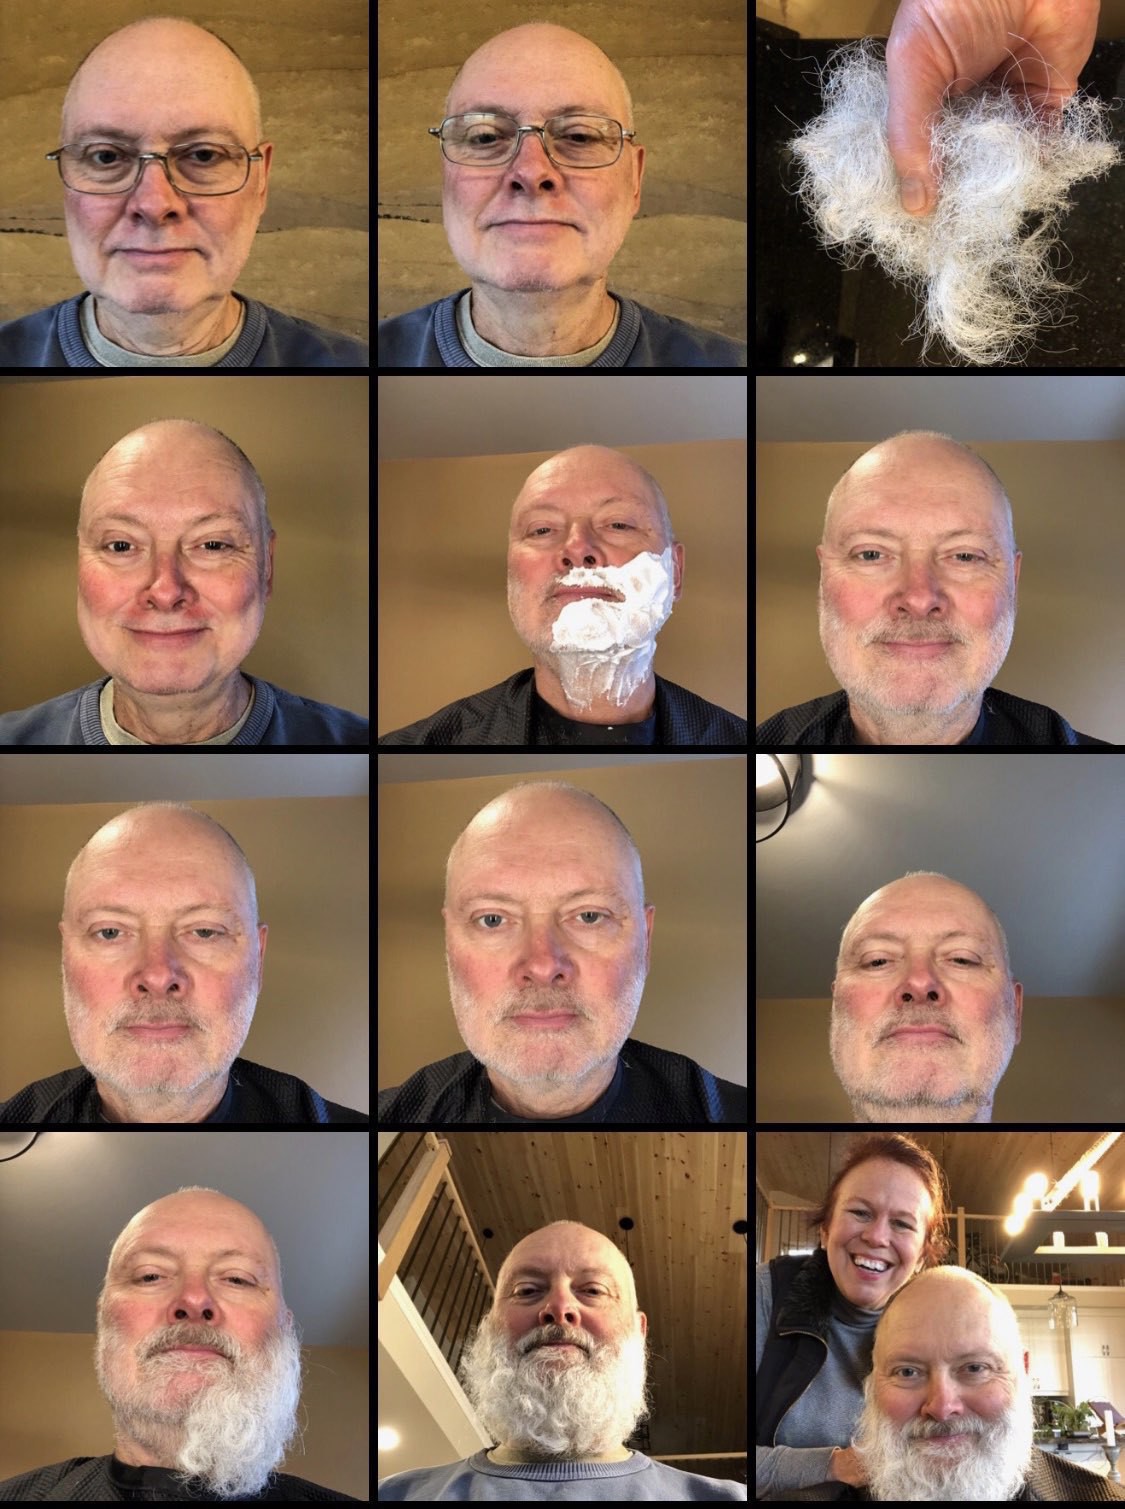 series of headshots showing before, during and after shaving